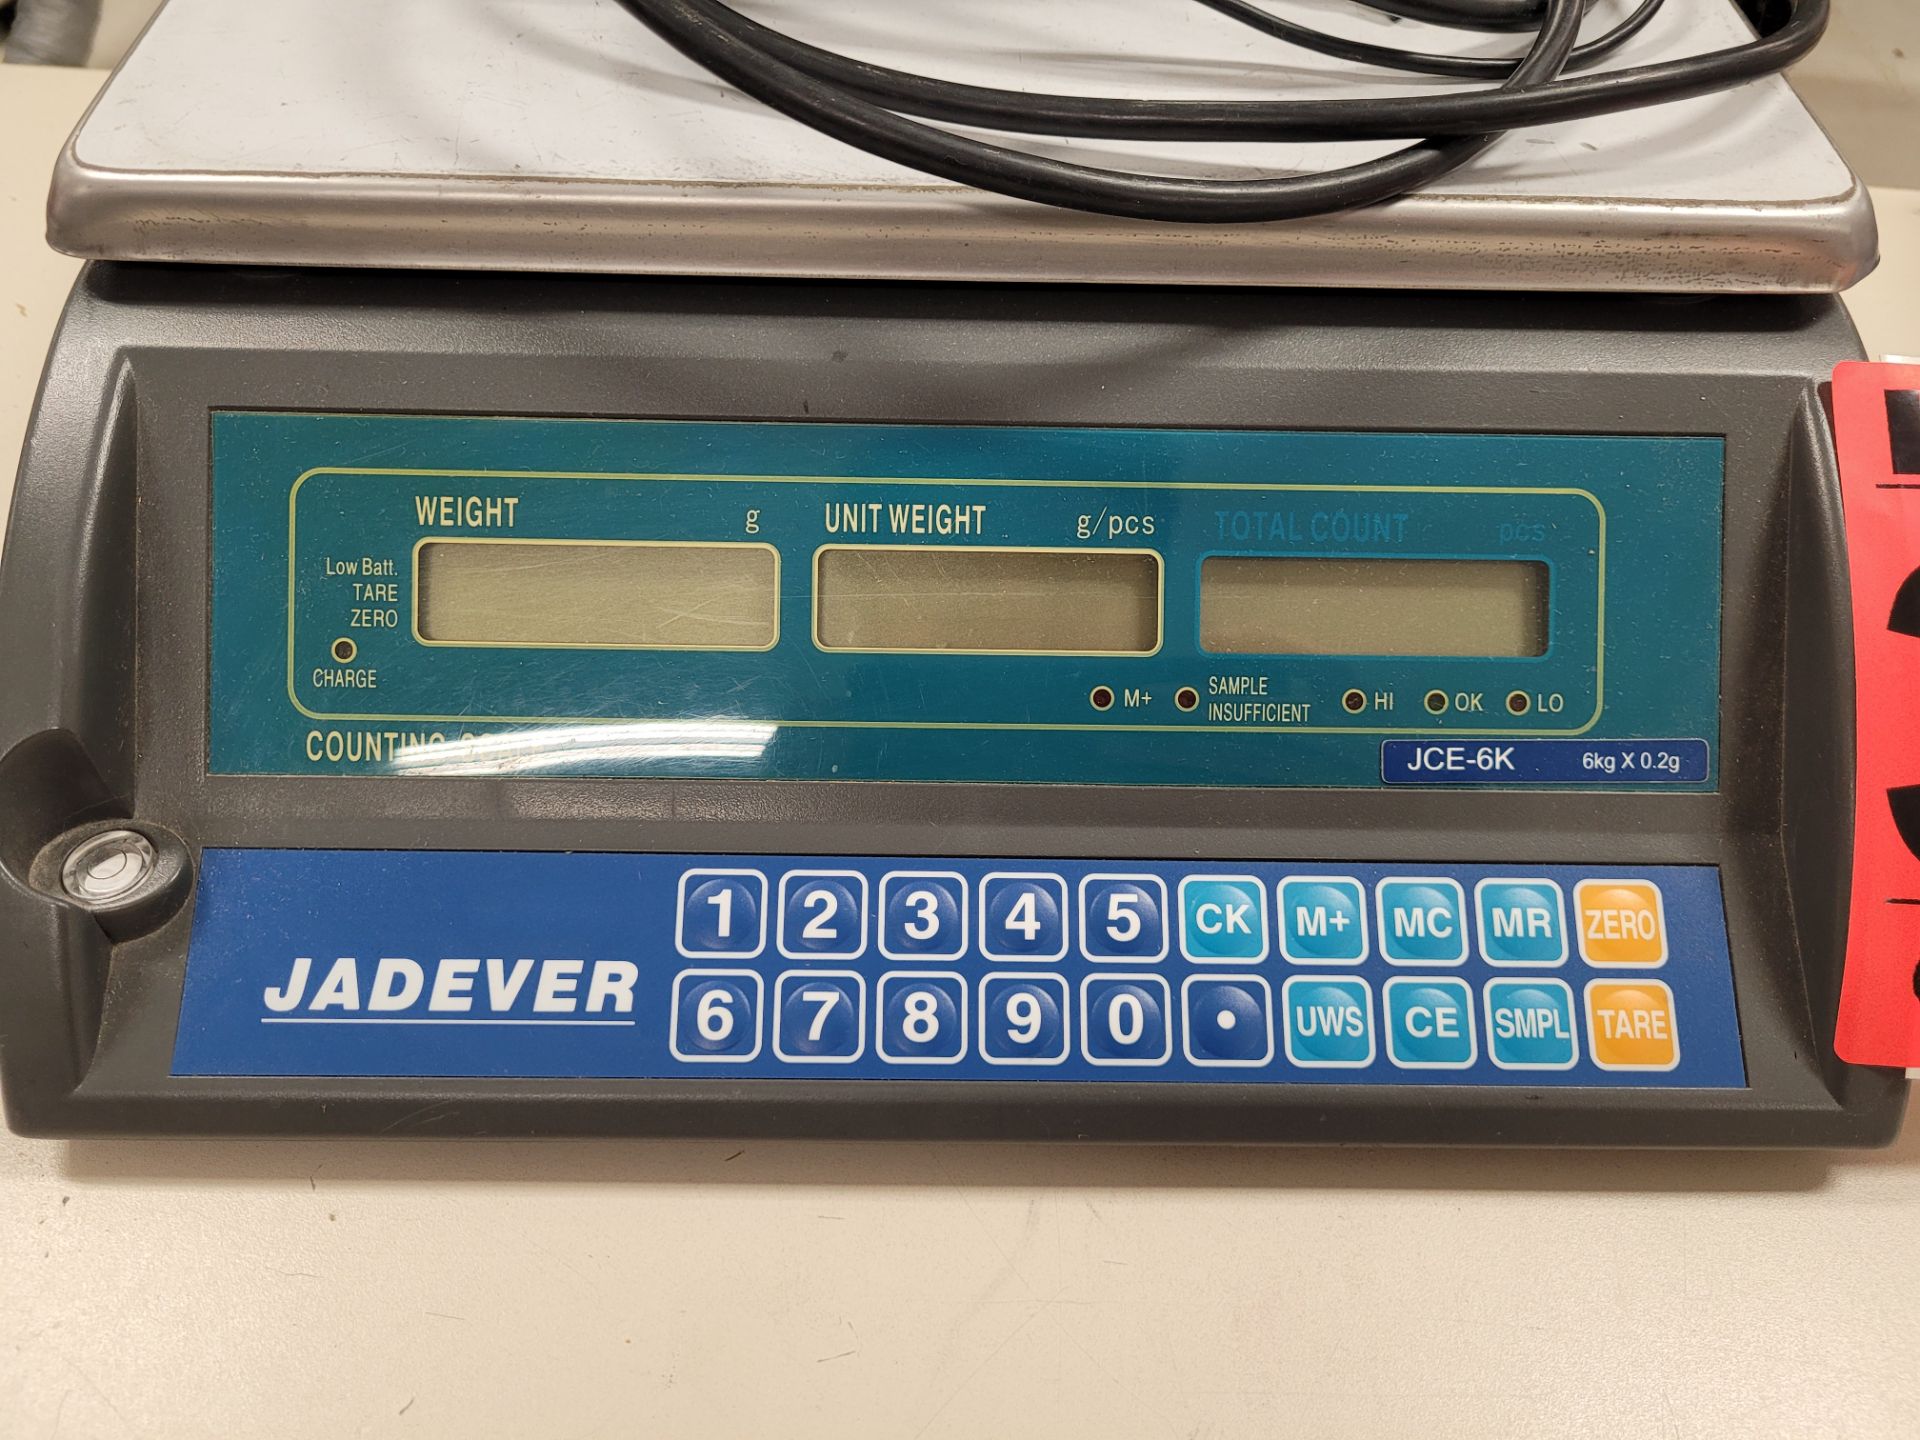 JADAVER mod. JCE-6K Courting Weighing Scale - Image 3 of 3